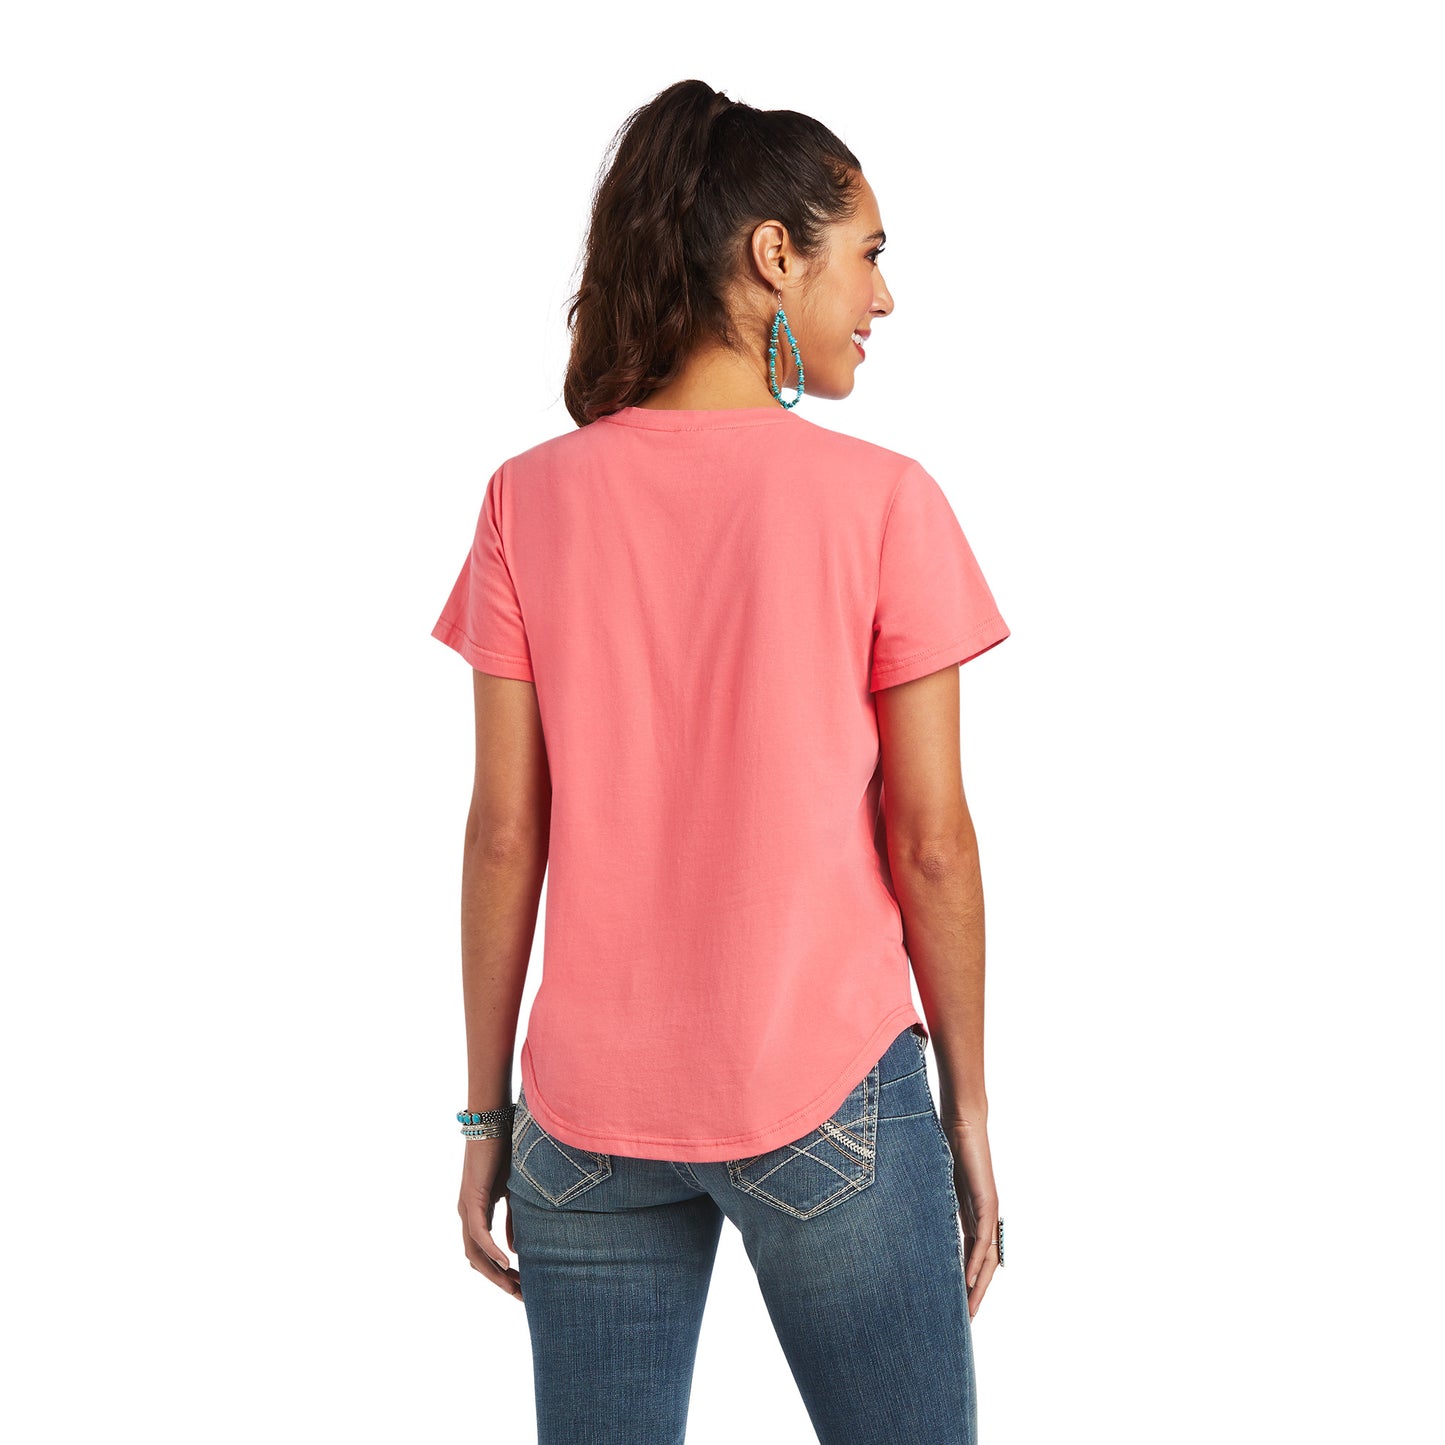 Ariat Ladies Coming Up Roses Short Sleeve Coral Paradise T-Shirt 10040507